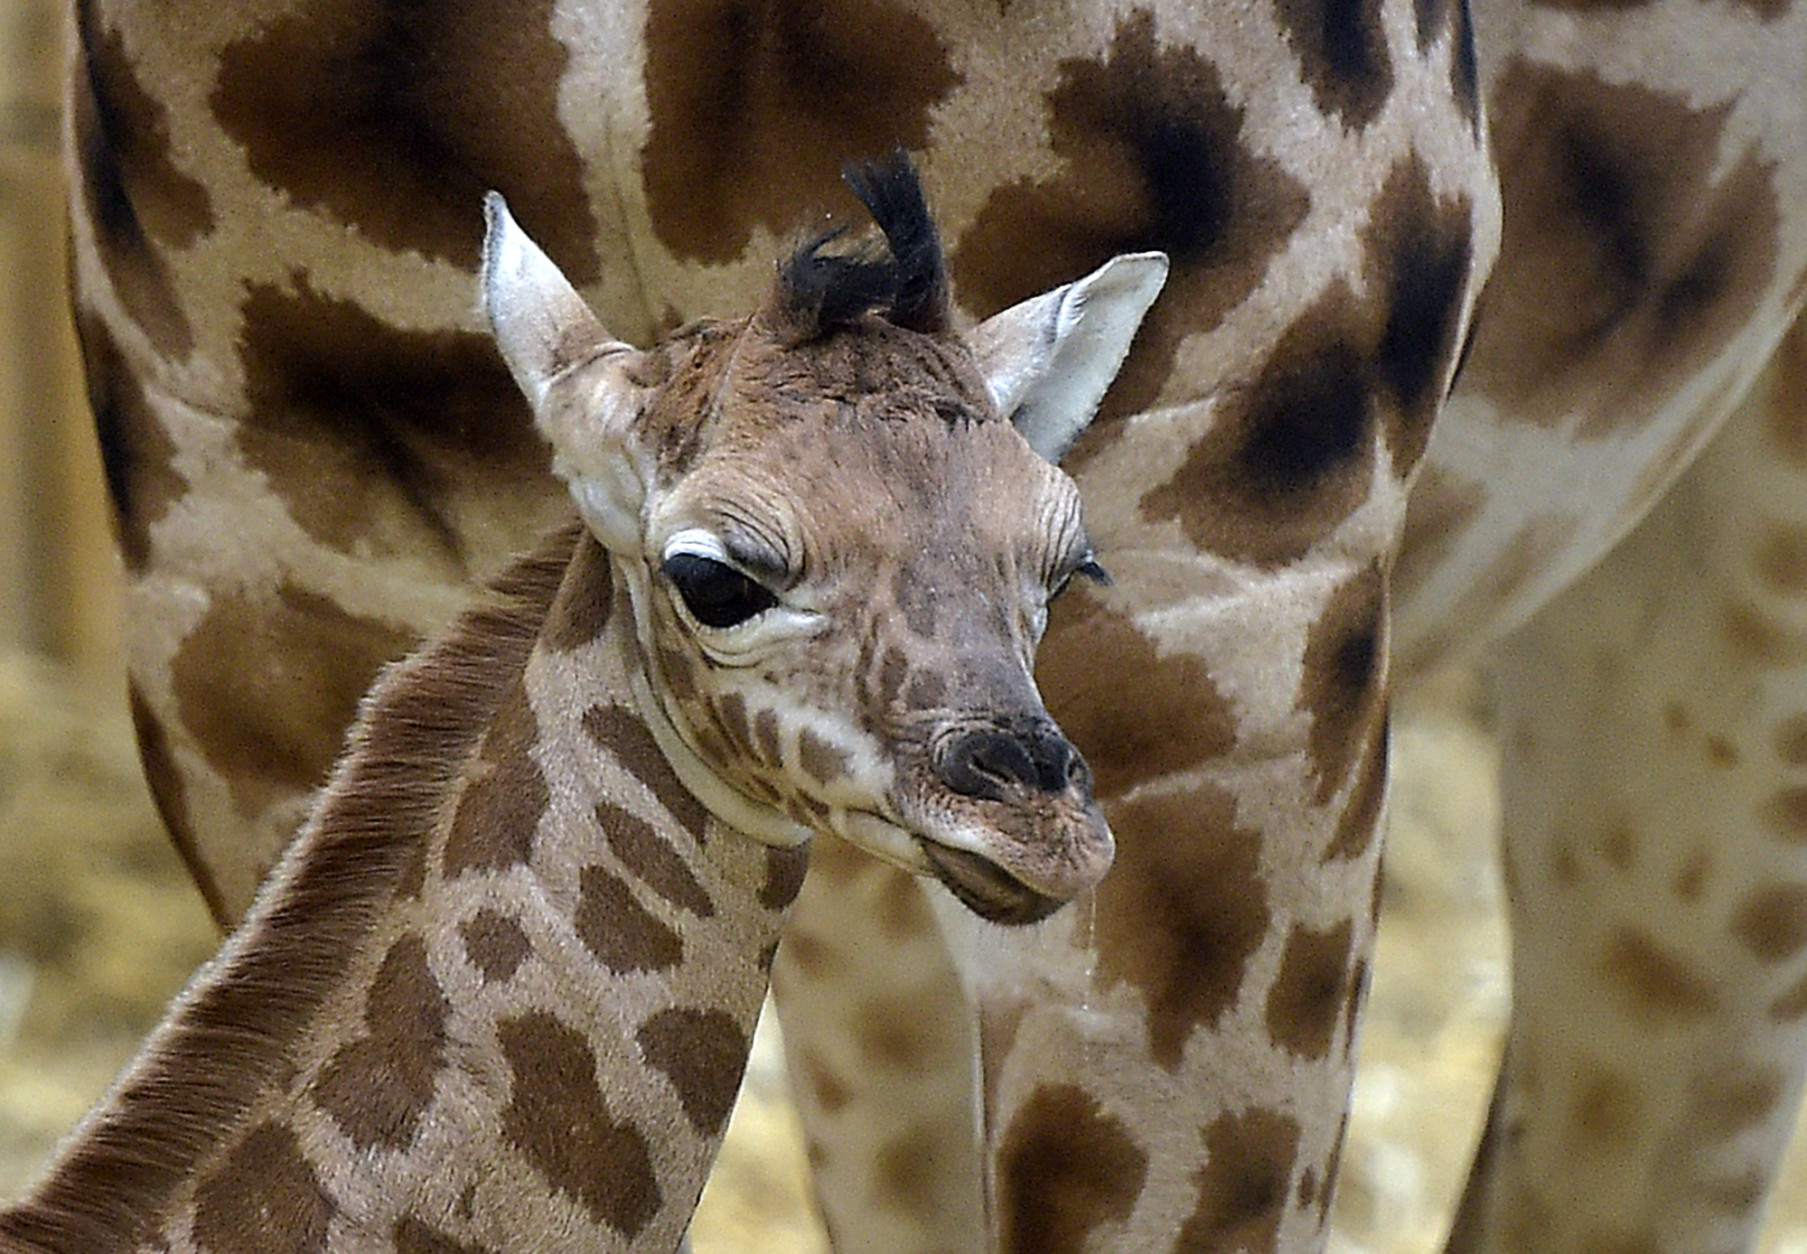 A little baby giraffe, born last Thursday, watches in front of its mother at the zoo in Gelsenkirchen, Germany, Tuesday, Jan. 6, 2015. (AP Photo/Martin Meissner)